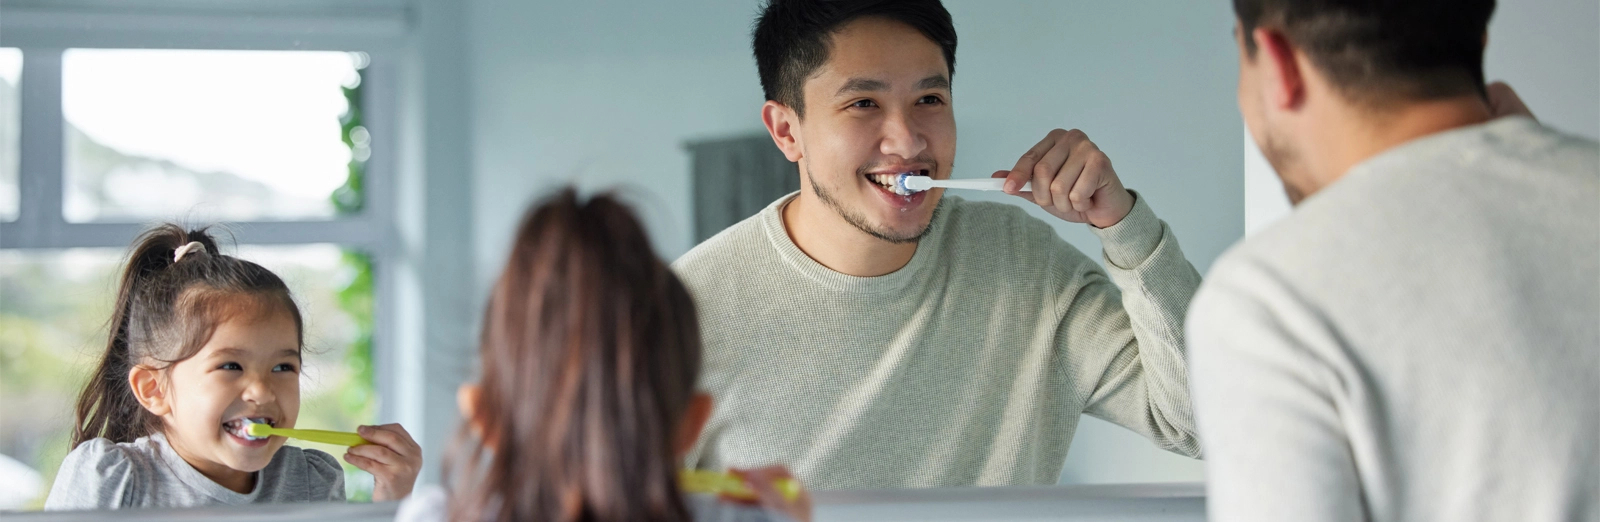 father-and-daughter-brushing-teeth-1600x522.webp